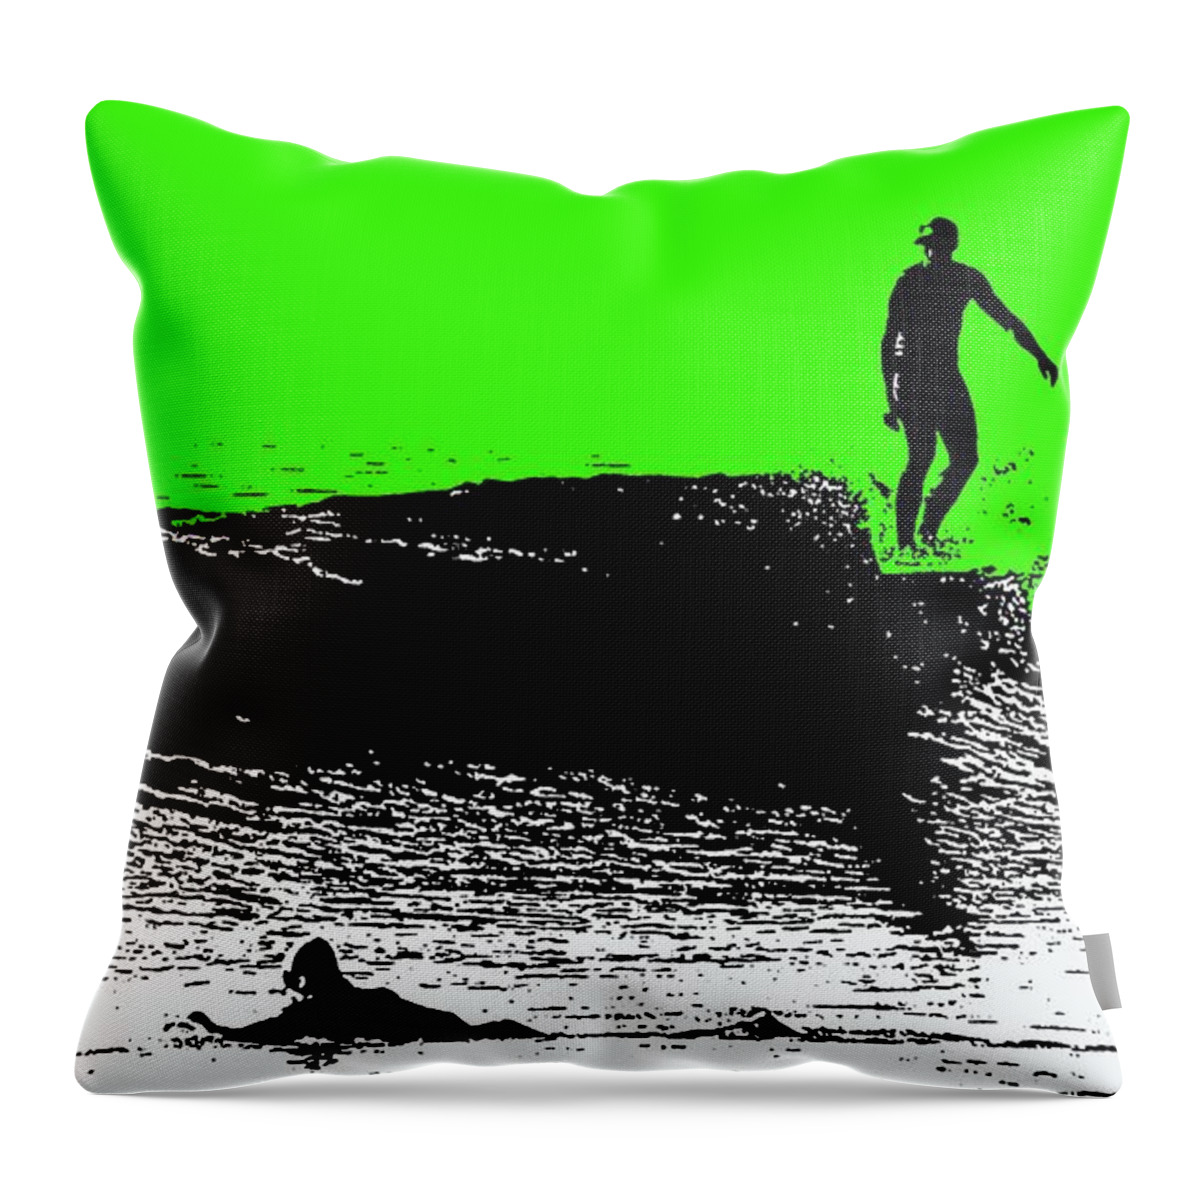 Surfing Throw Pillow featuring the photograph Sliding by Everette McMahan jr